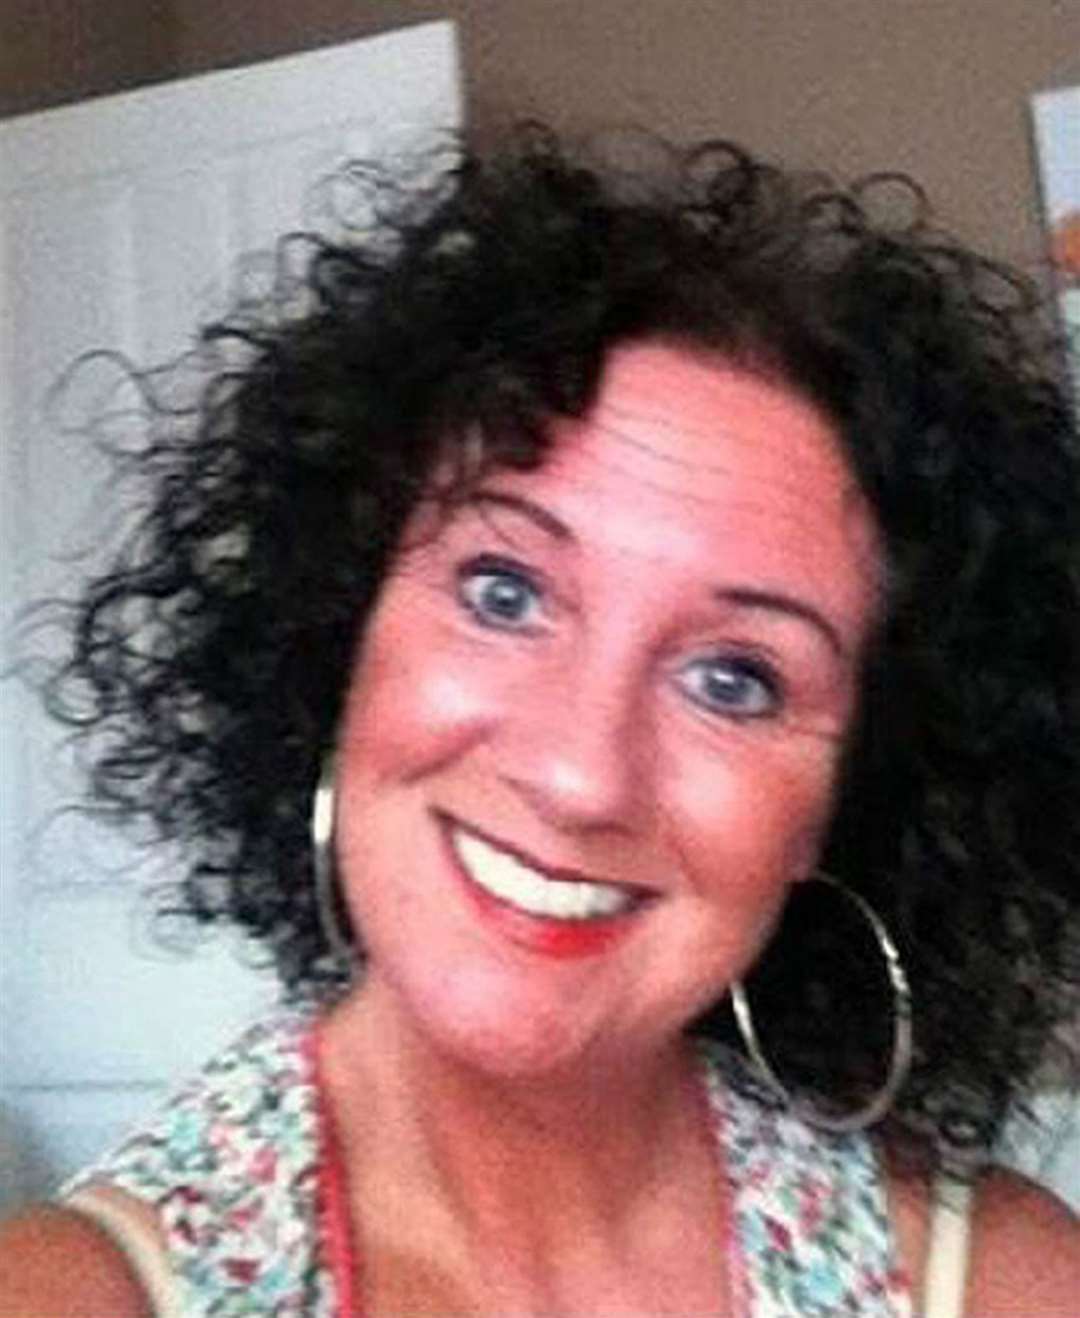 The death of Jane Tweddle has made her family stronger, they told the court (Greater Manchester Police/PA)